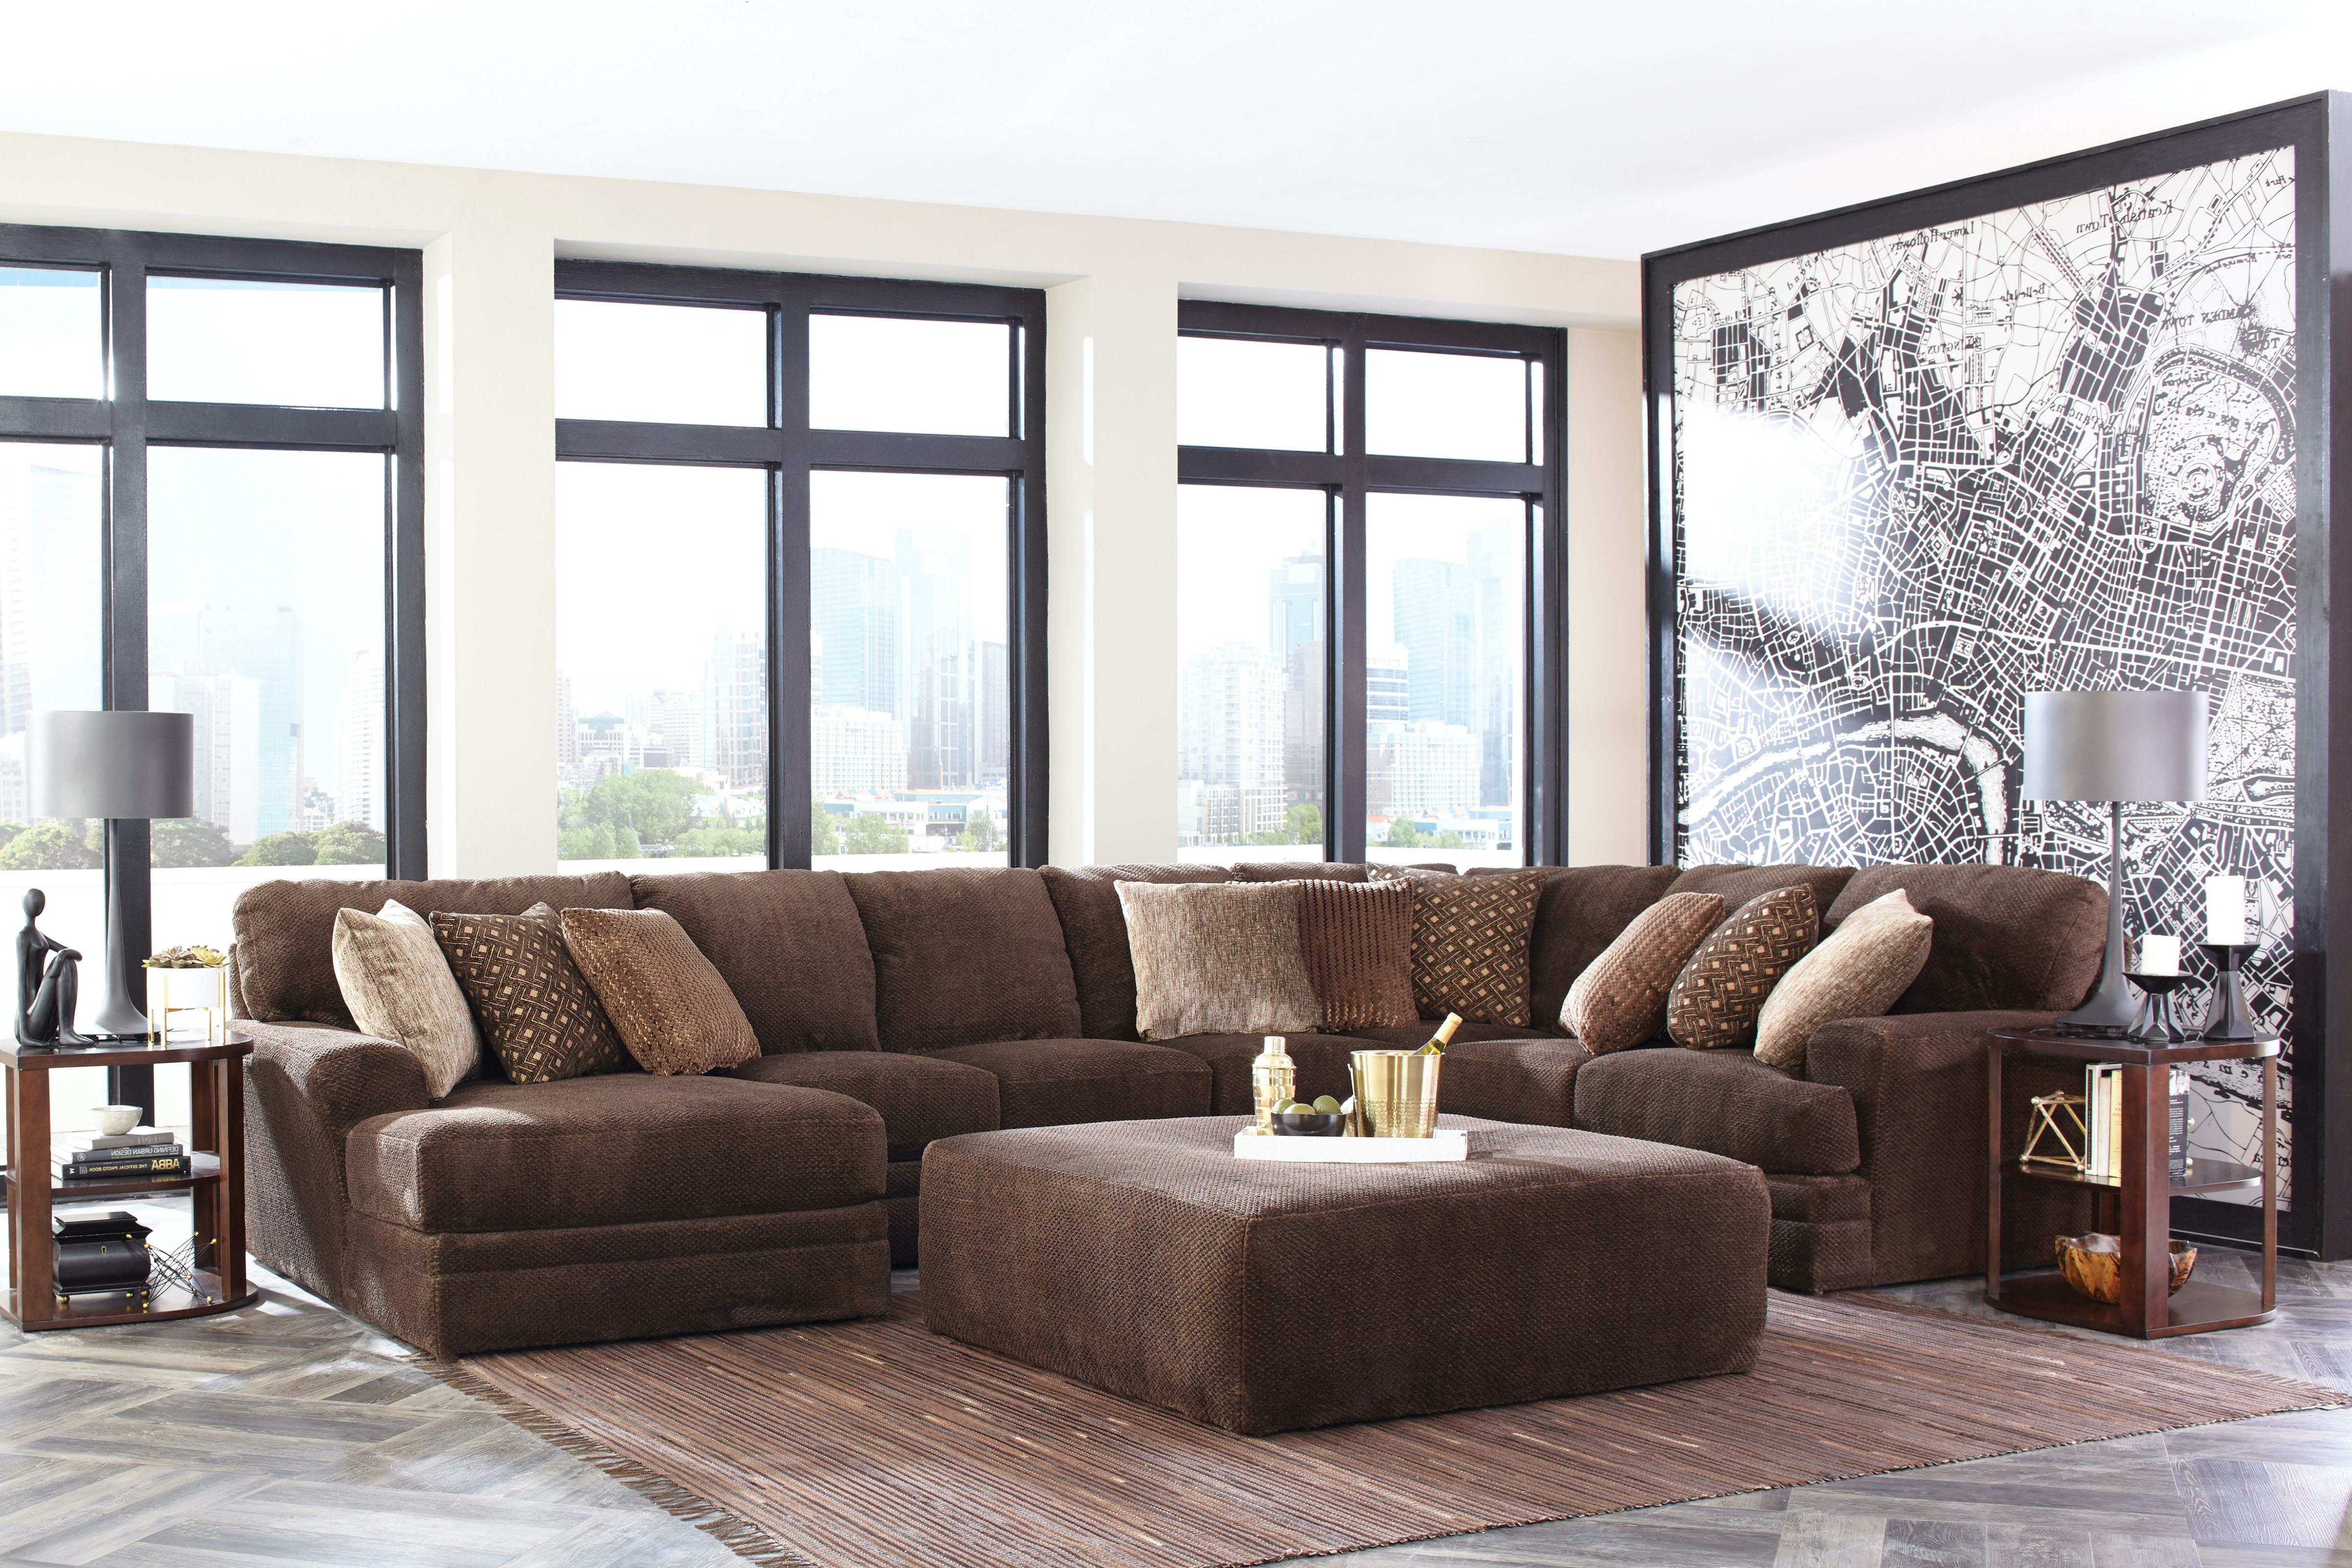 Mammoth - 3 Piece Sectional With Cocktail Ottoman (LSF Chaise) - Chocolate